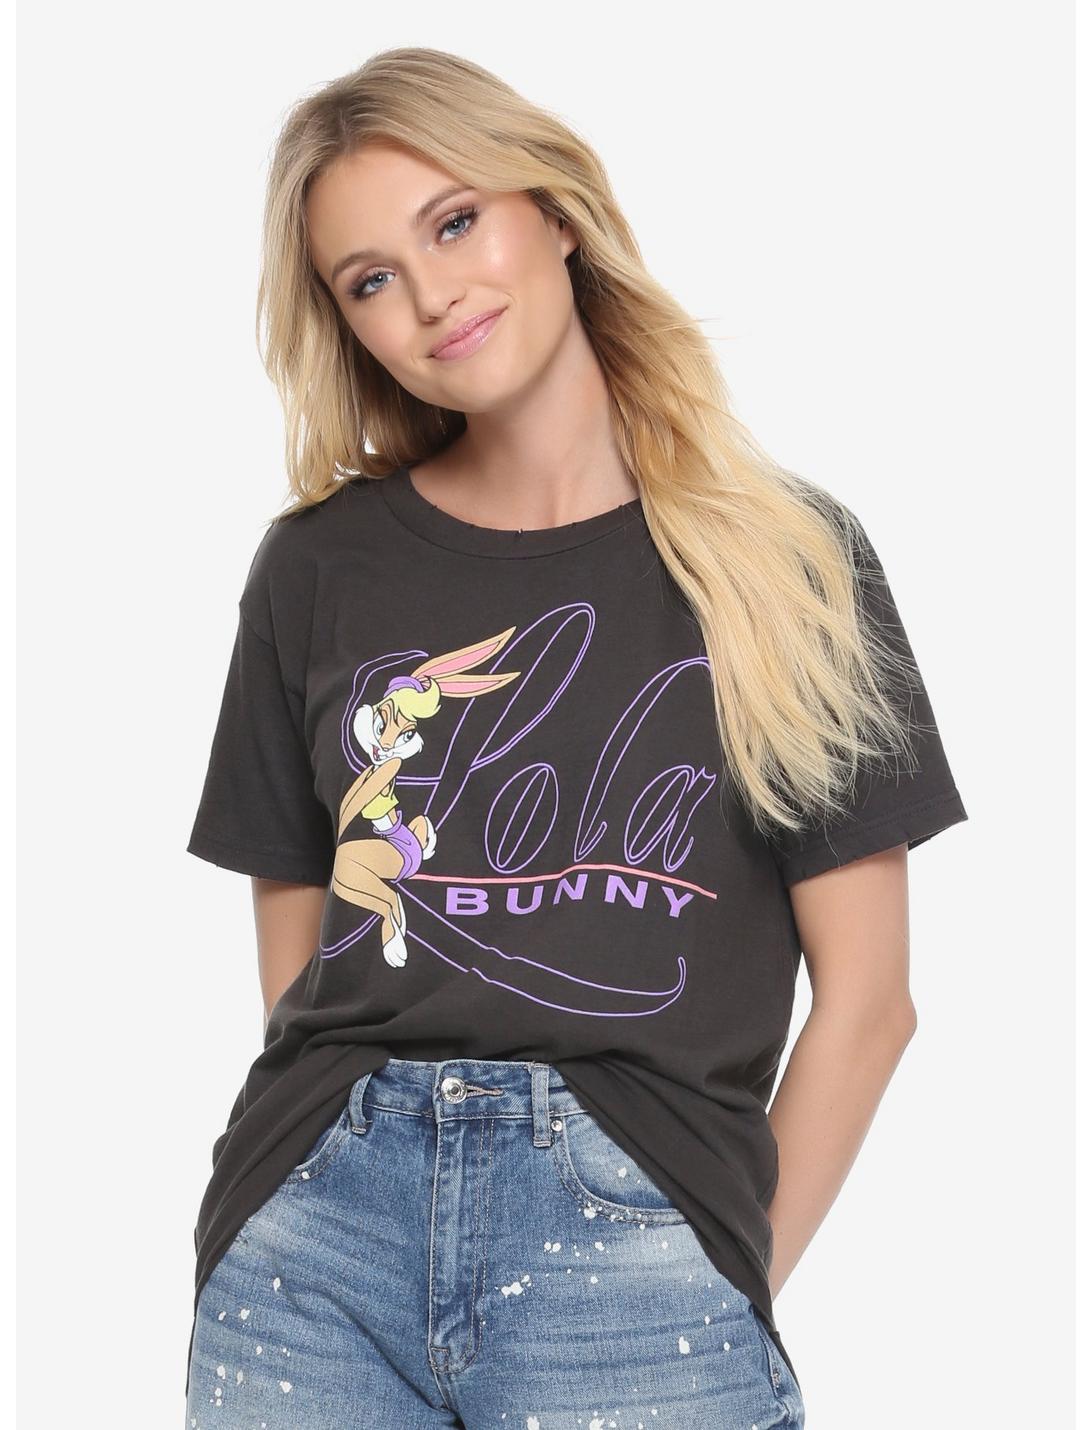 Space Jam Lola Bunny Womens Tee - BoxLunch Exclusive, BLACK, hi-res